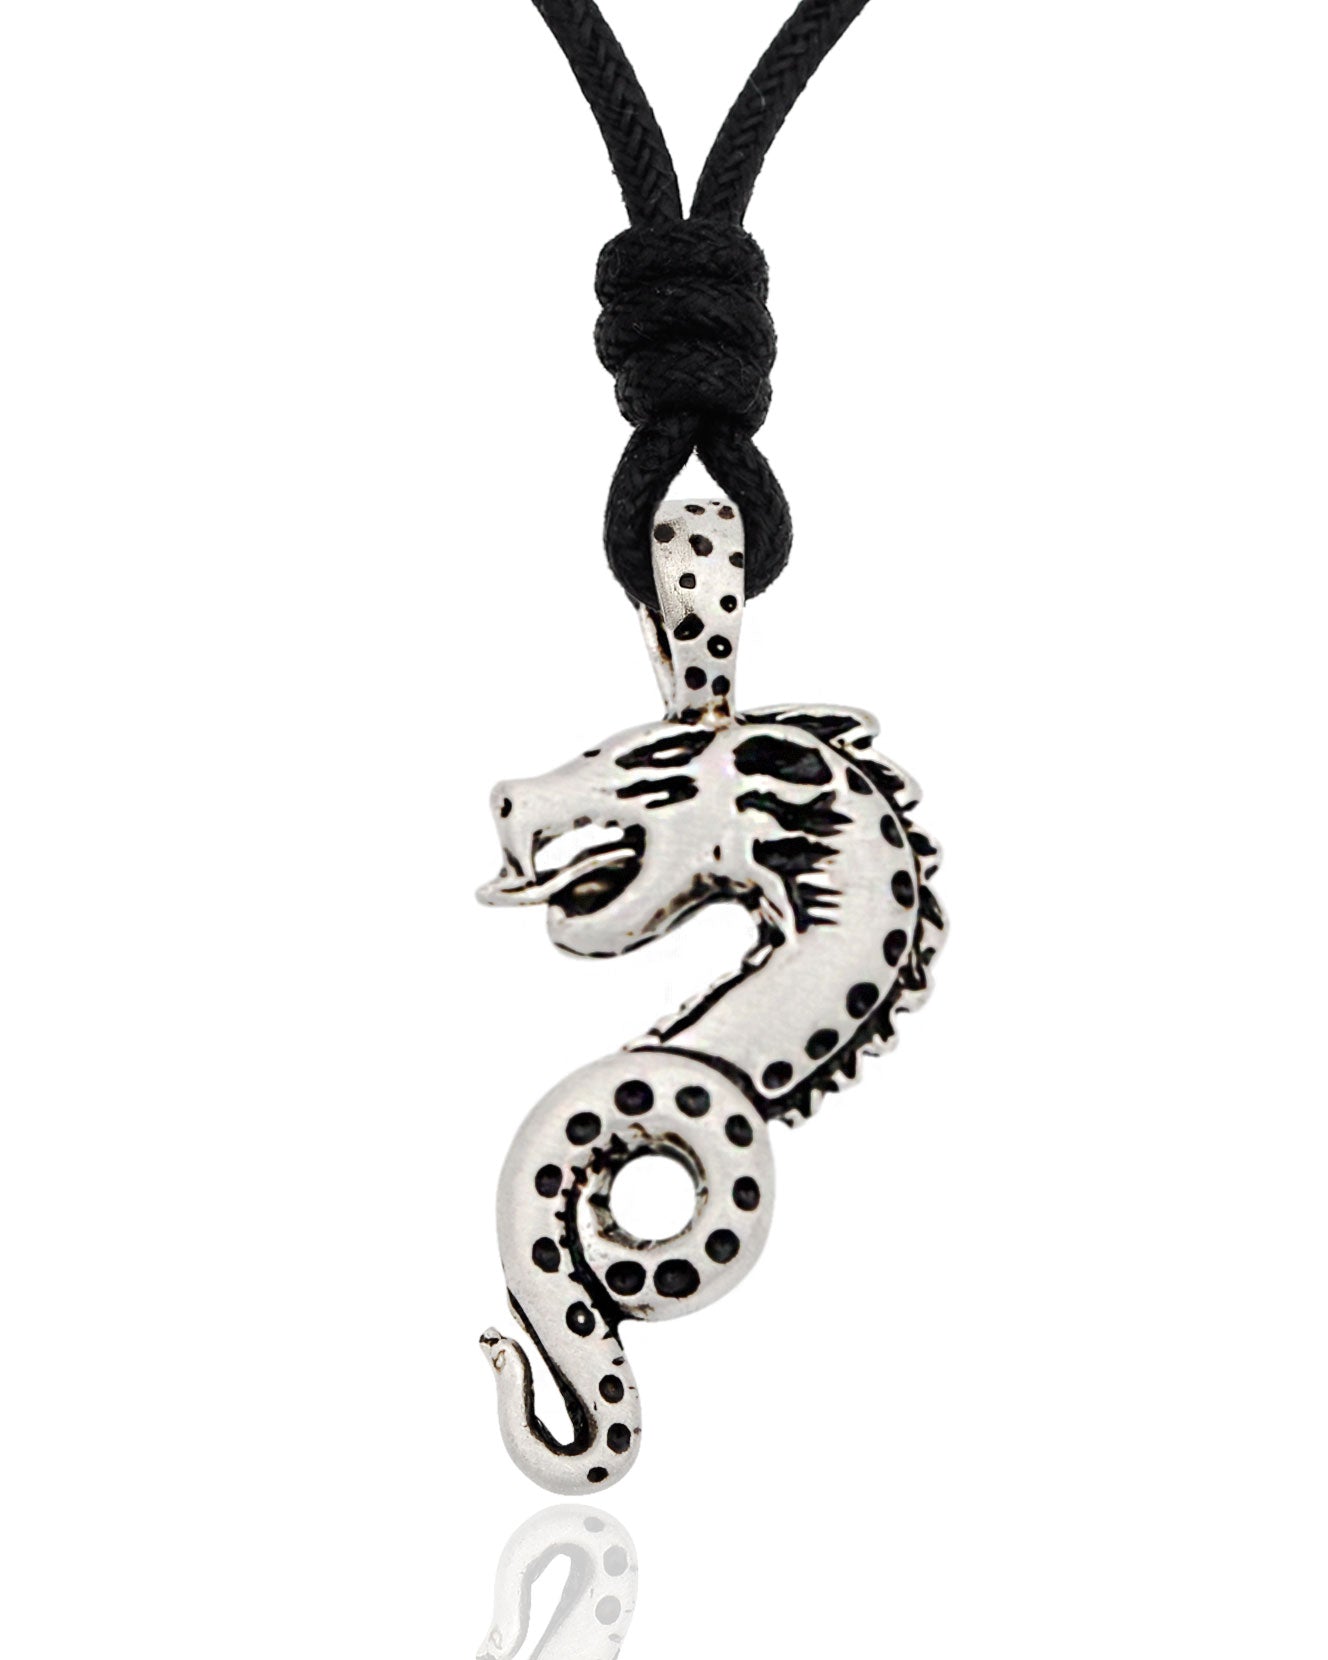 Dragon Serpent Silver Pewter Charm Necklace Pendant Jewelry